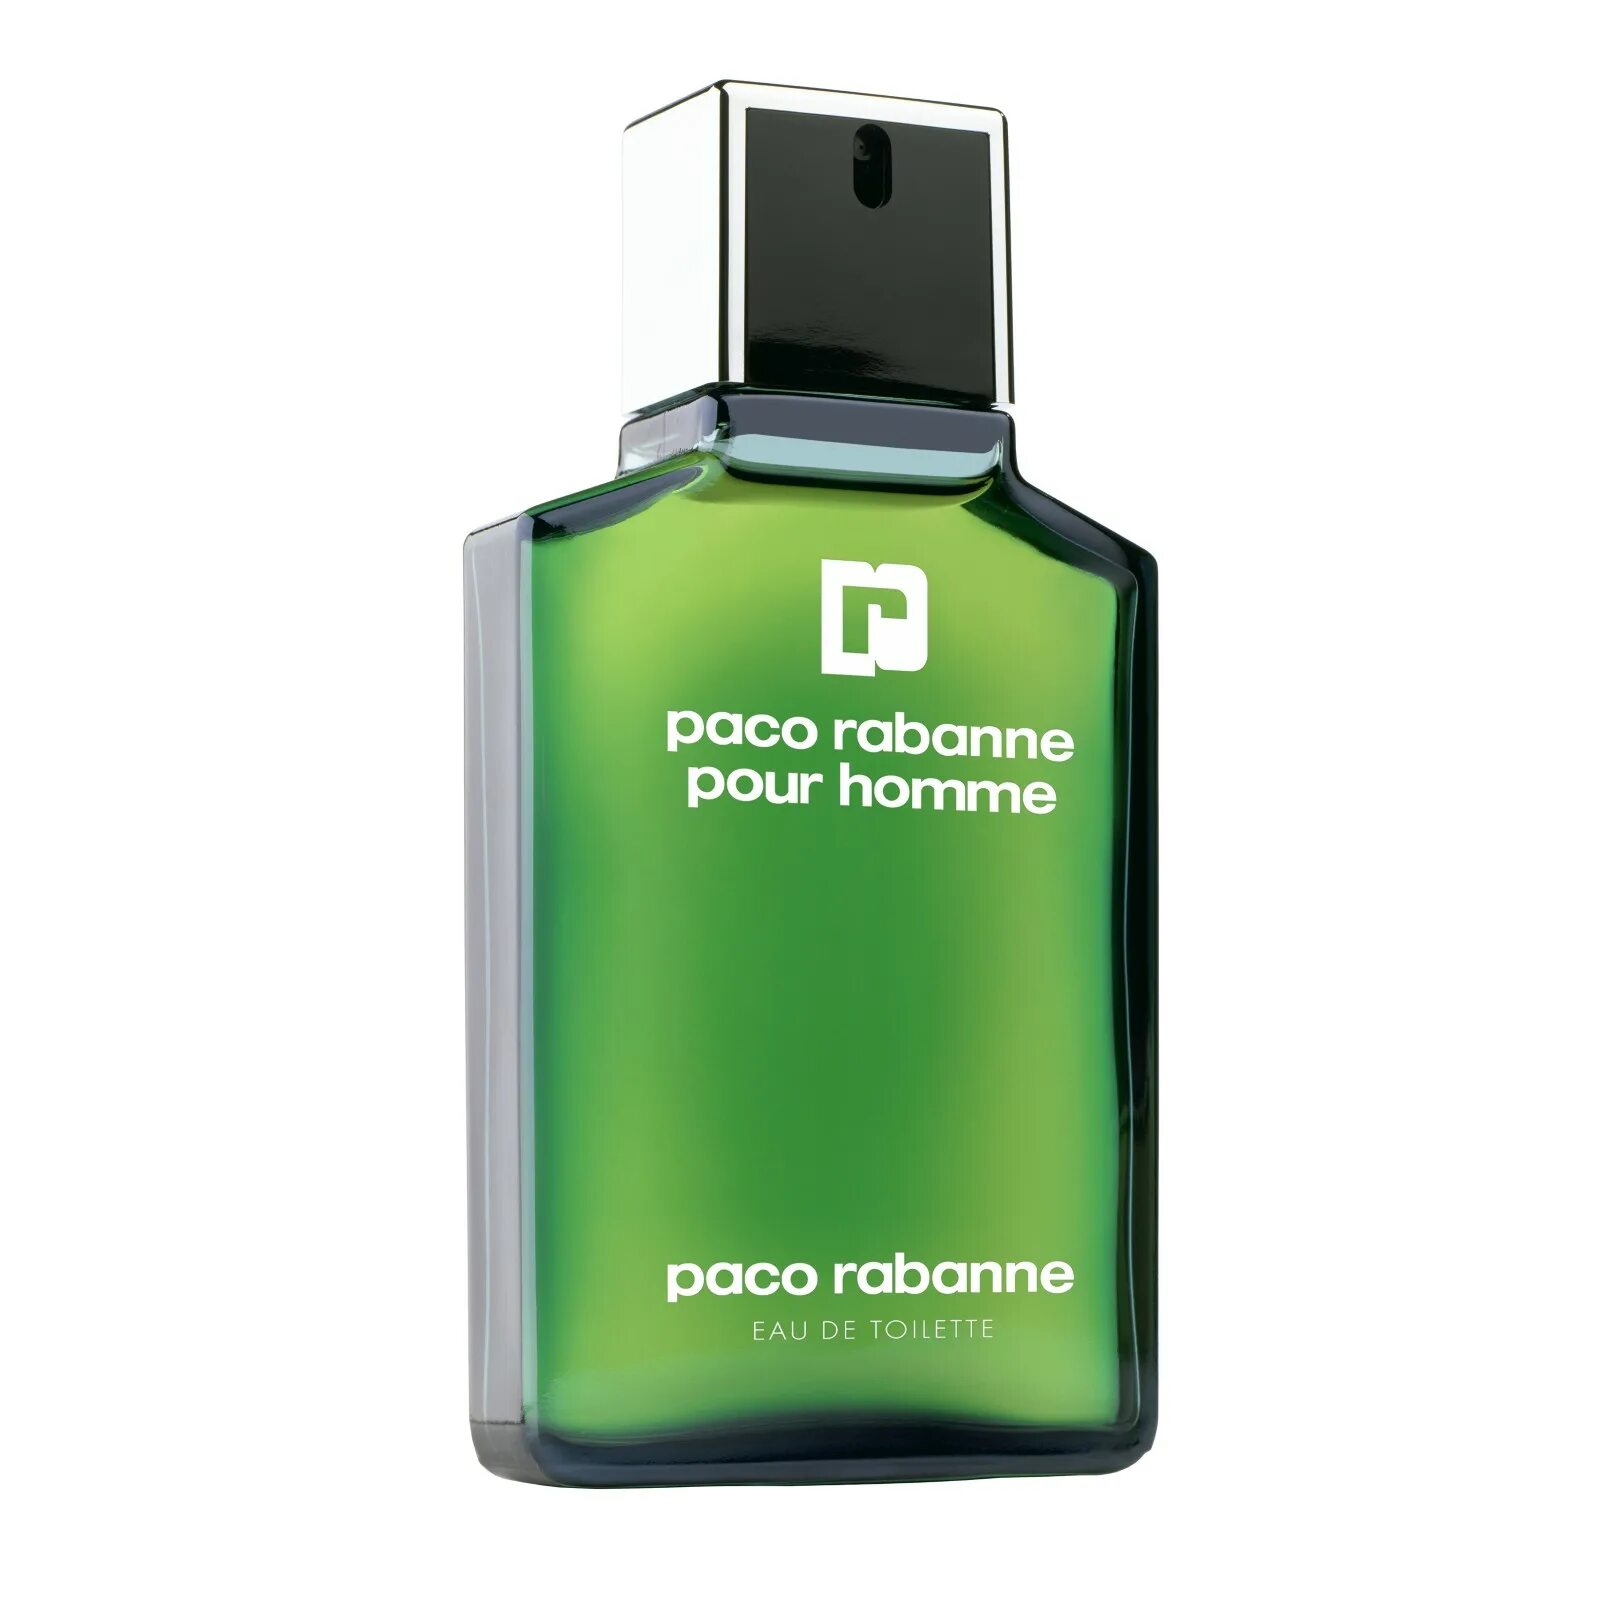 Homme paco. Paco Rabanne pour homme 100 мл. Paco Rabanne pour homme EDT. Paco Rabanne pour homme EDT 100ml. Paco Rabanne pour homme men 30ml EDT Tester.